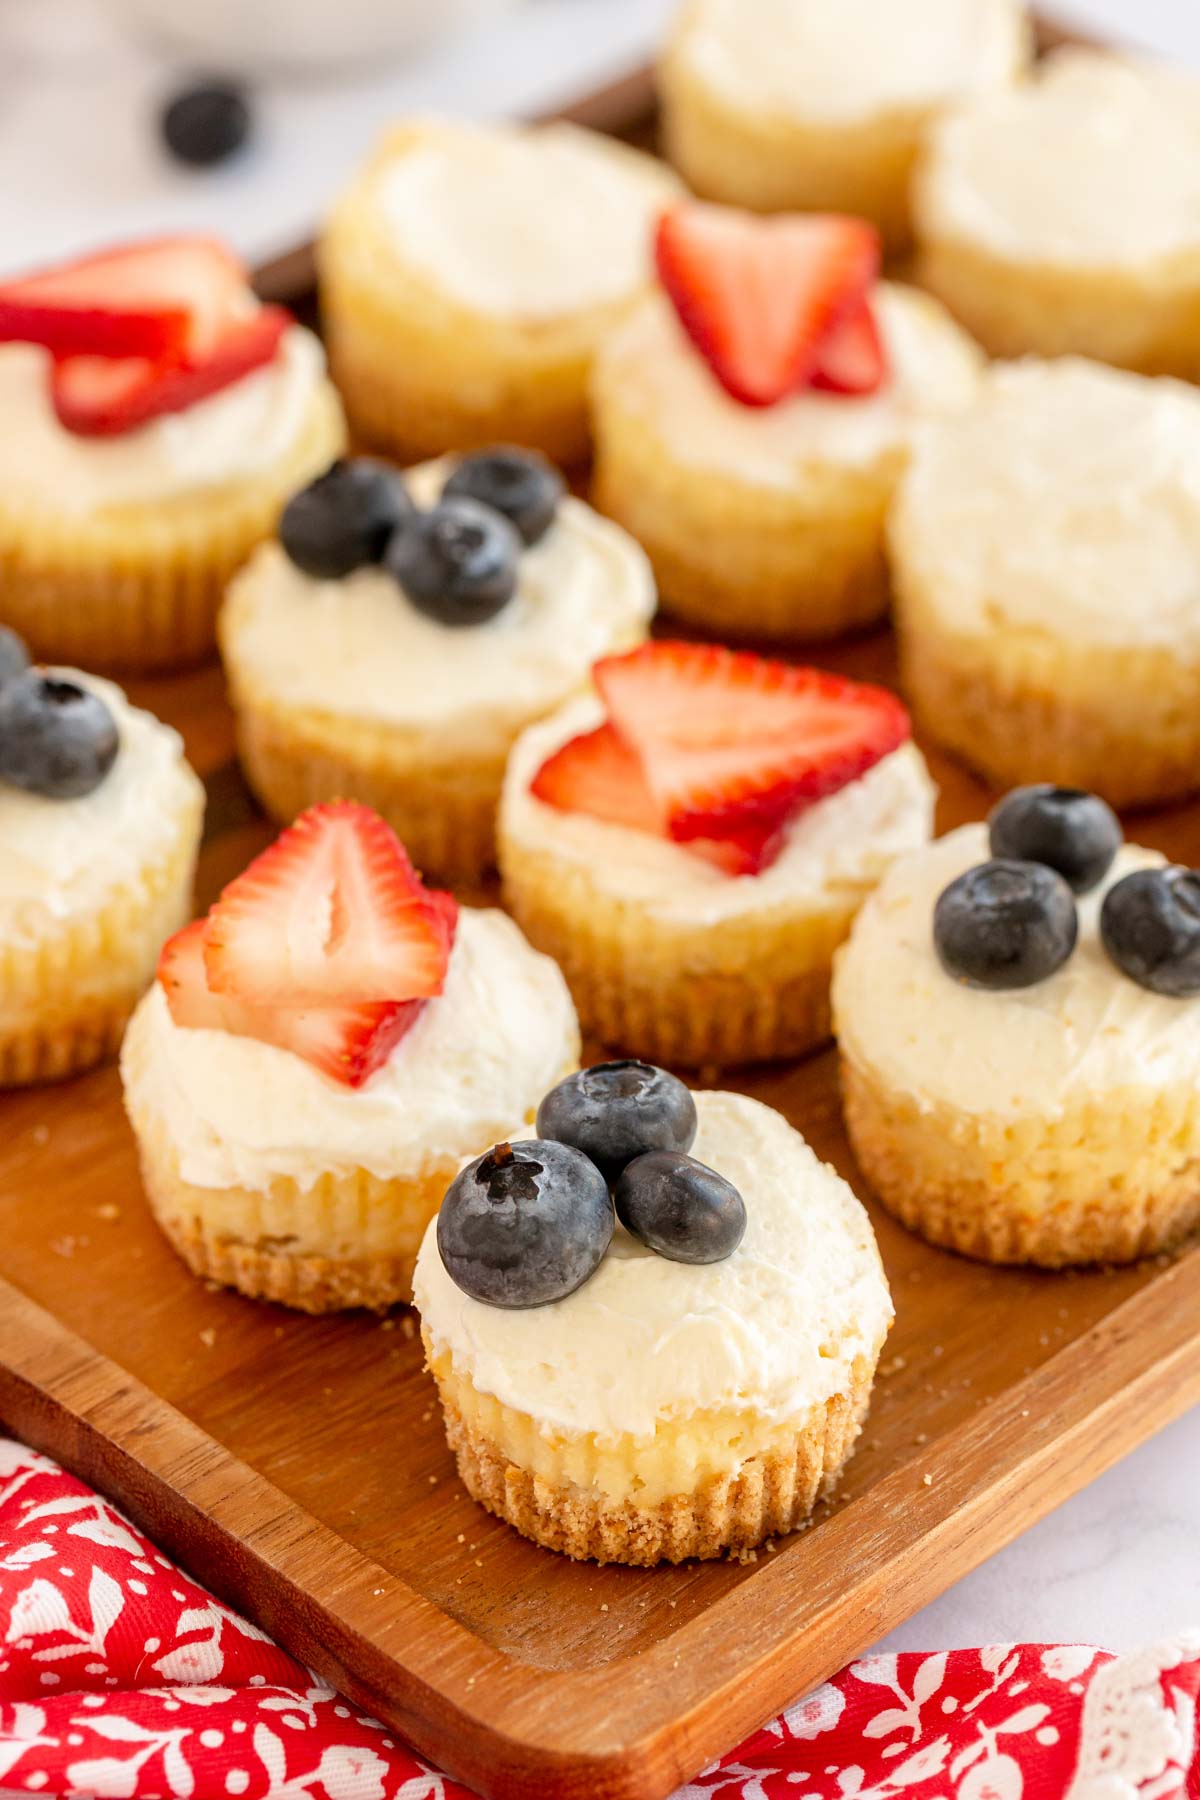 Mini Cheesecakes With Mix-and-Match Toppings